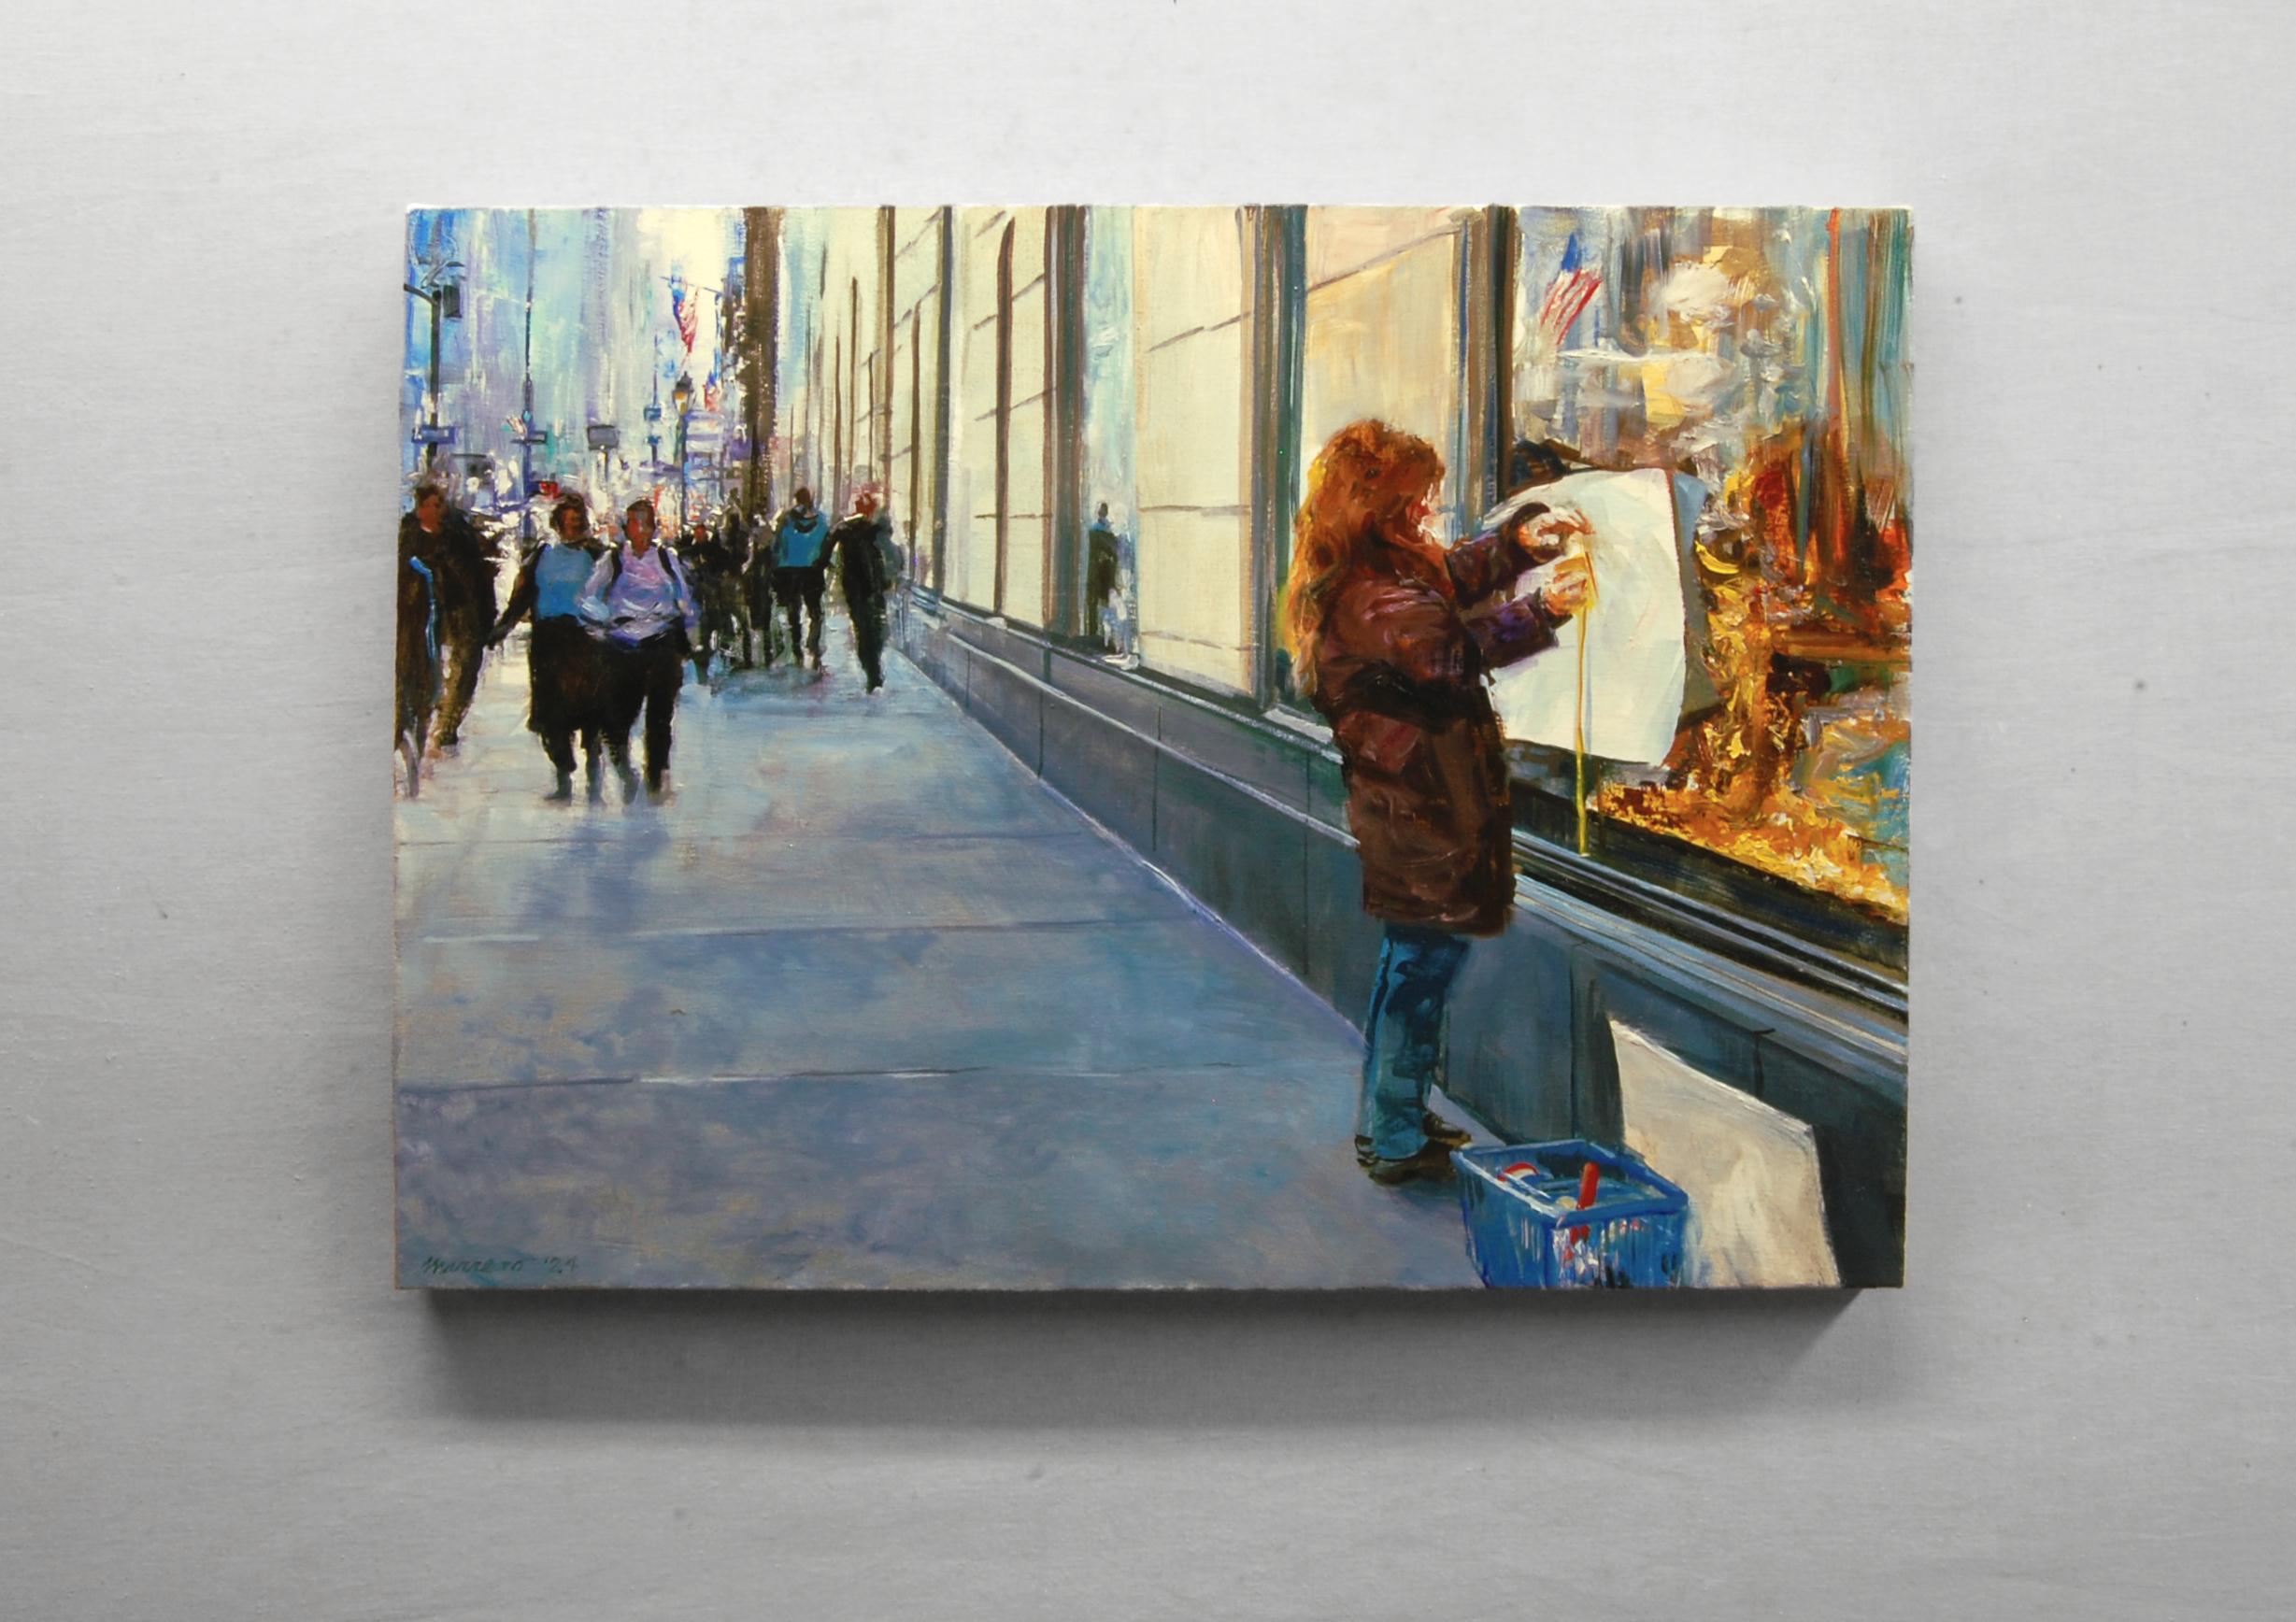 <p>Artist Comments<br>Artist Onelio Marrero finds inspiration in observing fellow artists at work. This vibrant oil painting features a window designer along the sidewalk of midtown Manhattan. The rich colors and expressive brushwork portray her